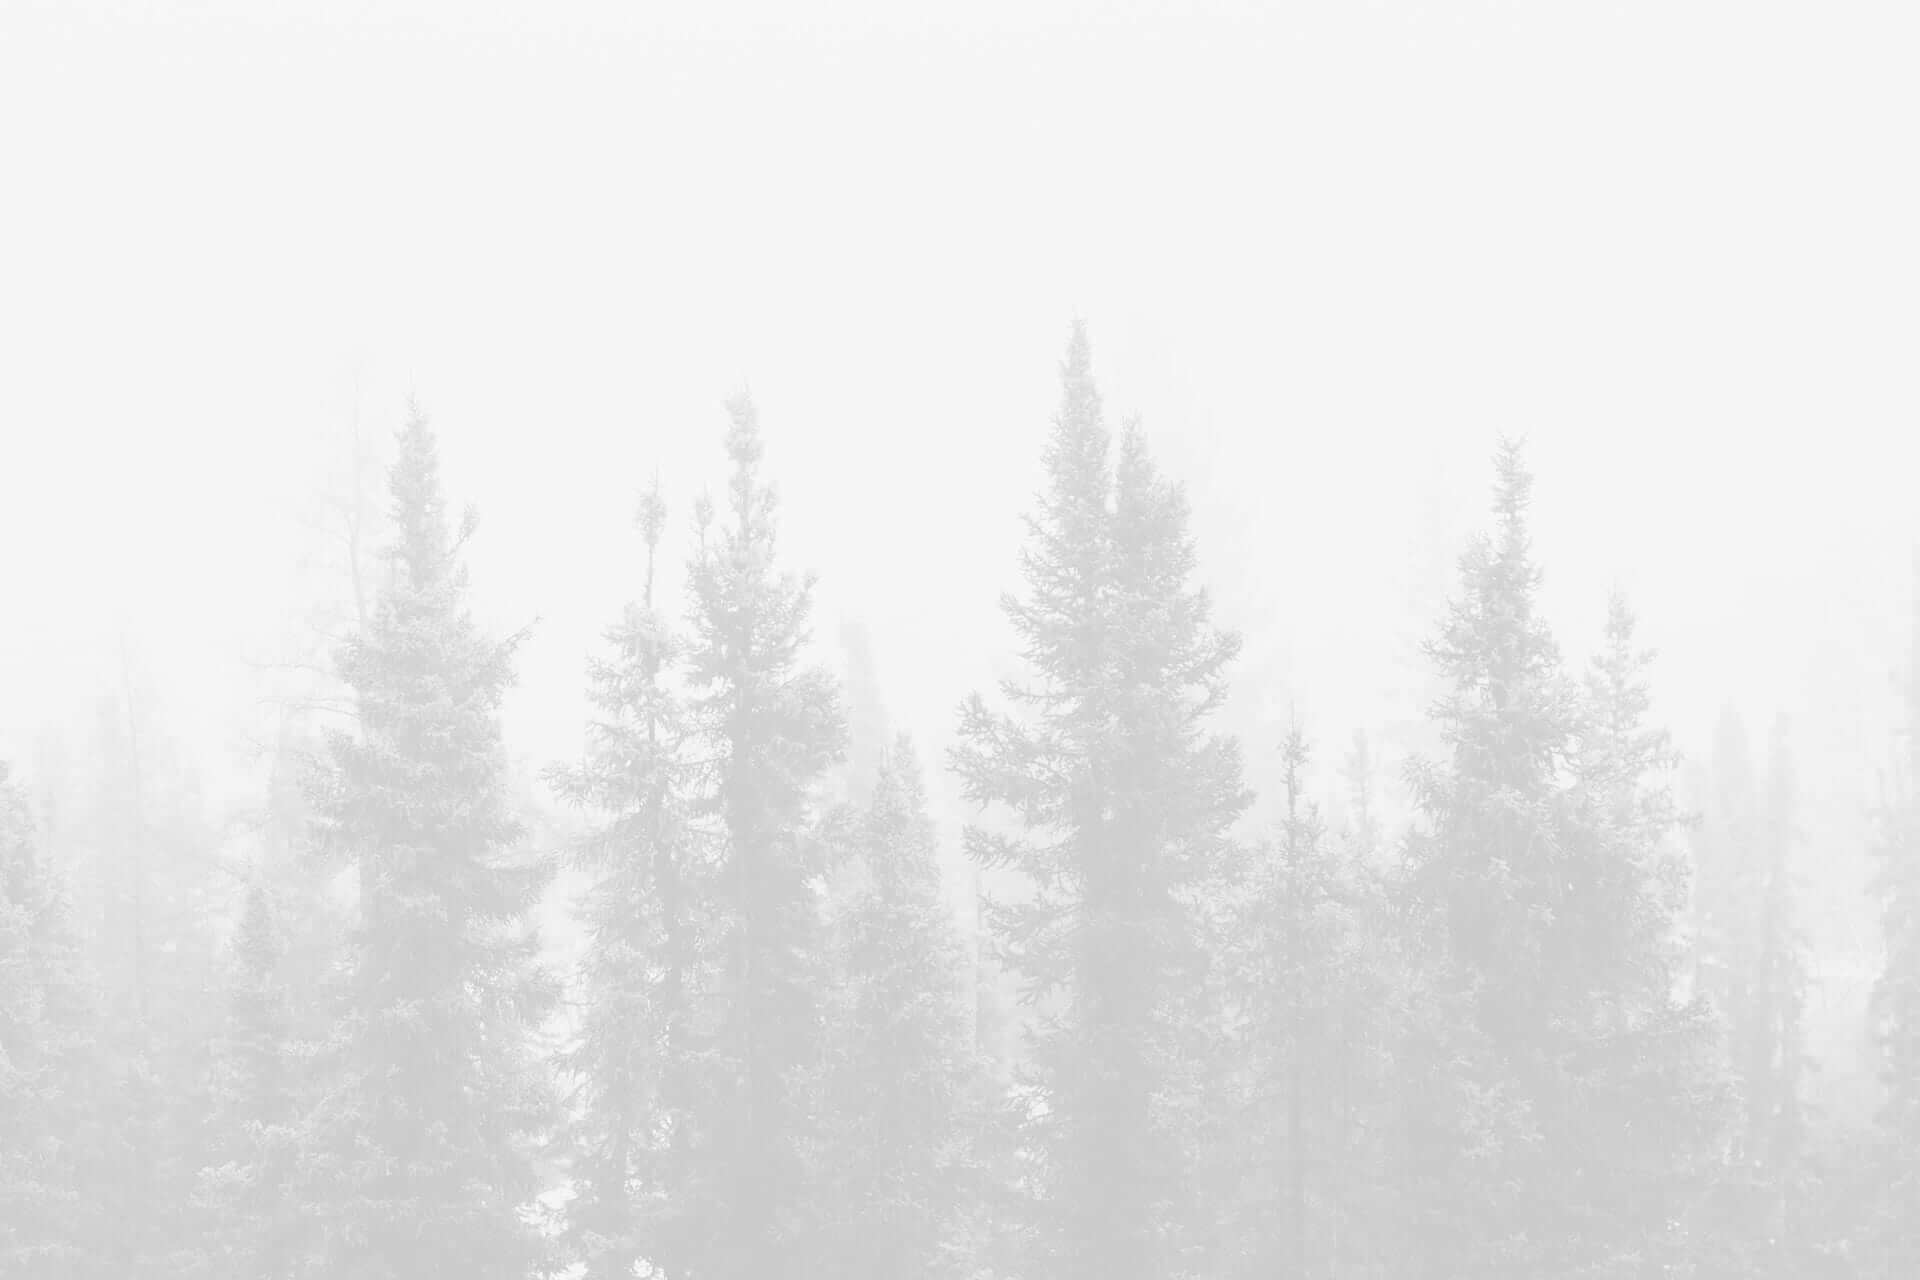 A monochrome image of a dense forest with tall conifer trees obscured by heavy fog.